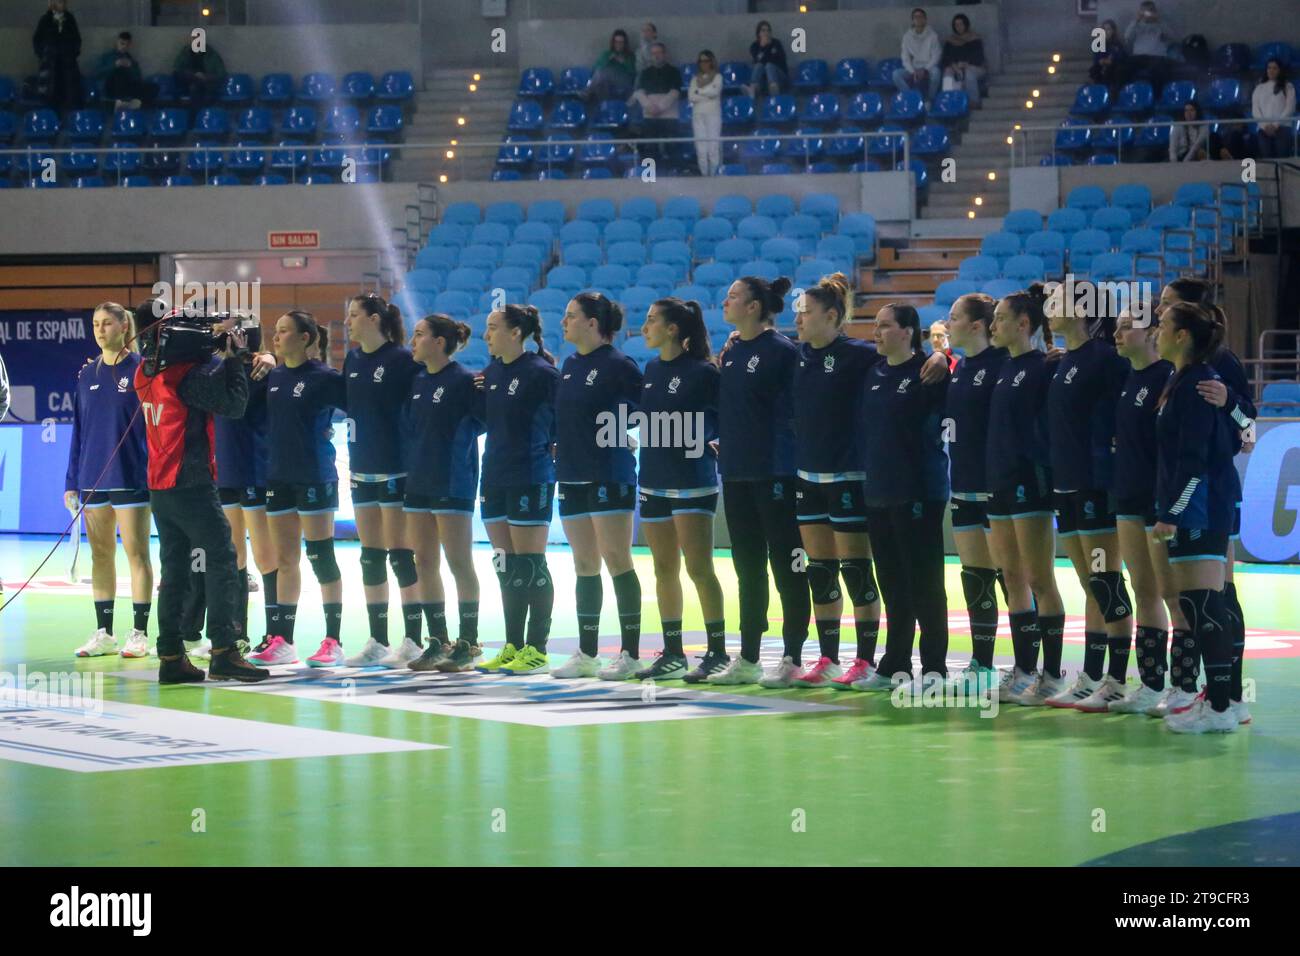 Santander, Spain, November 24, 2023: The Argentine national team listening to the anthem during the 1st Matchday of the 2023 Spanish Women's International Tournament between Argentina and Serbia, on November 24, 2023, at the Santander Sports Palace, in Santander, Spain . Credit: Alberto Brevers / Alamy Live News. Stock Photo